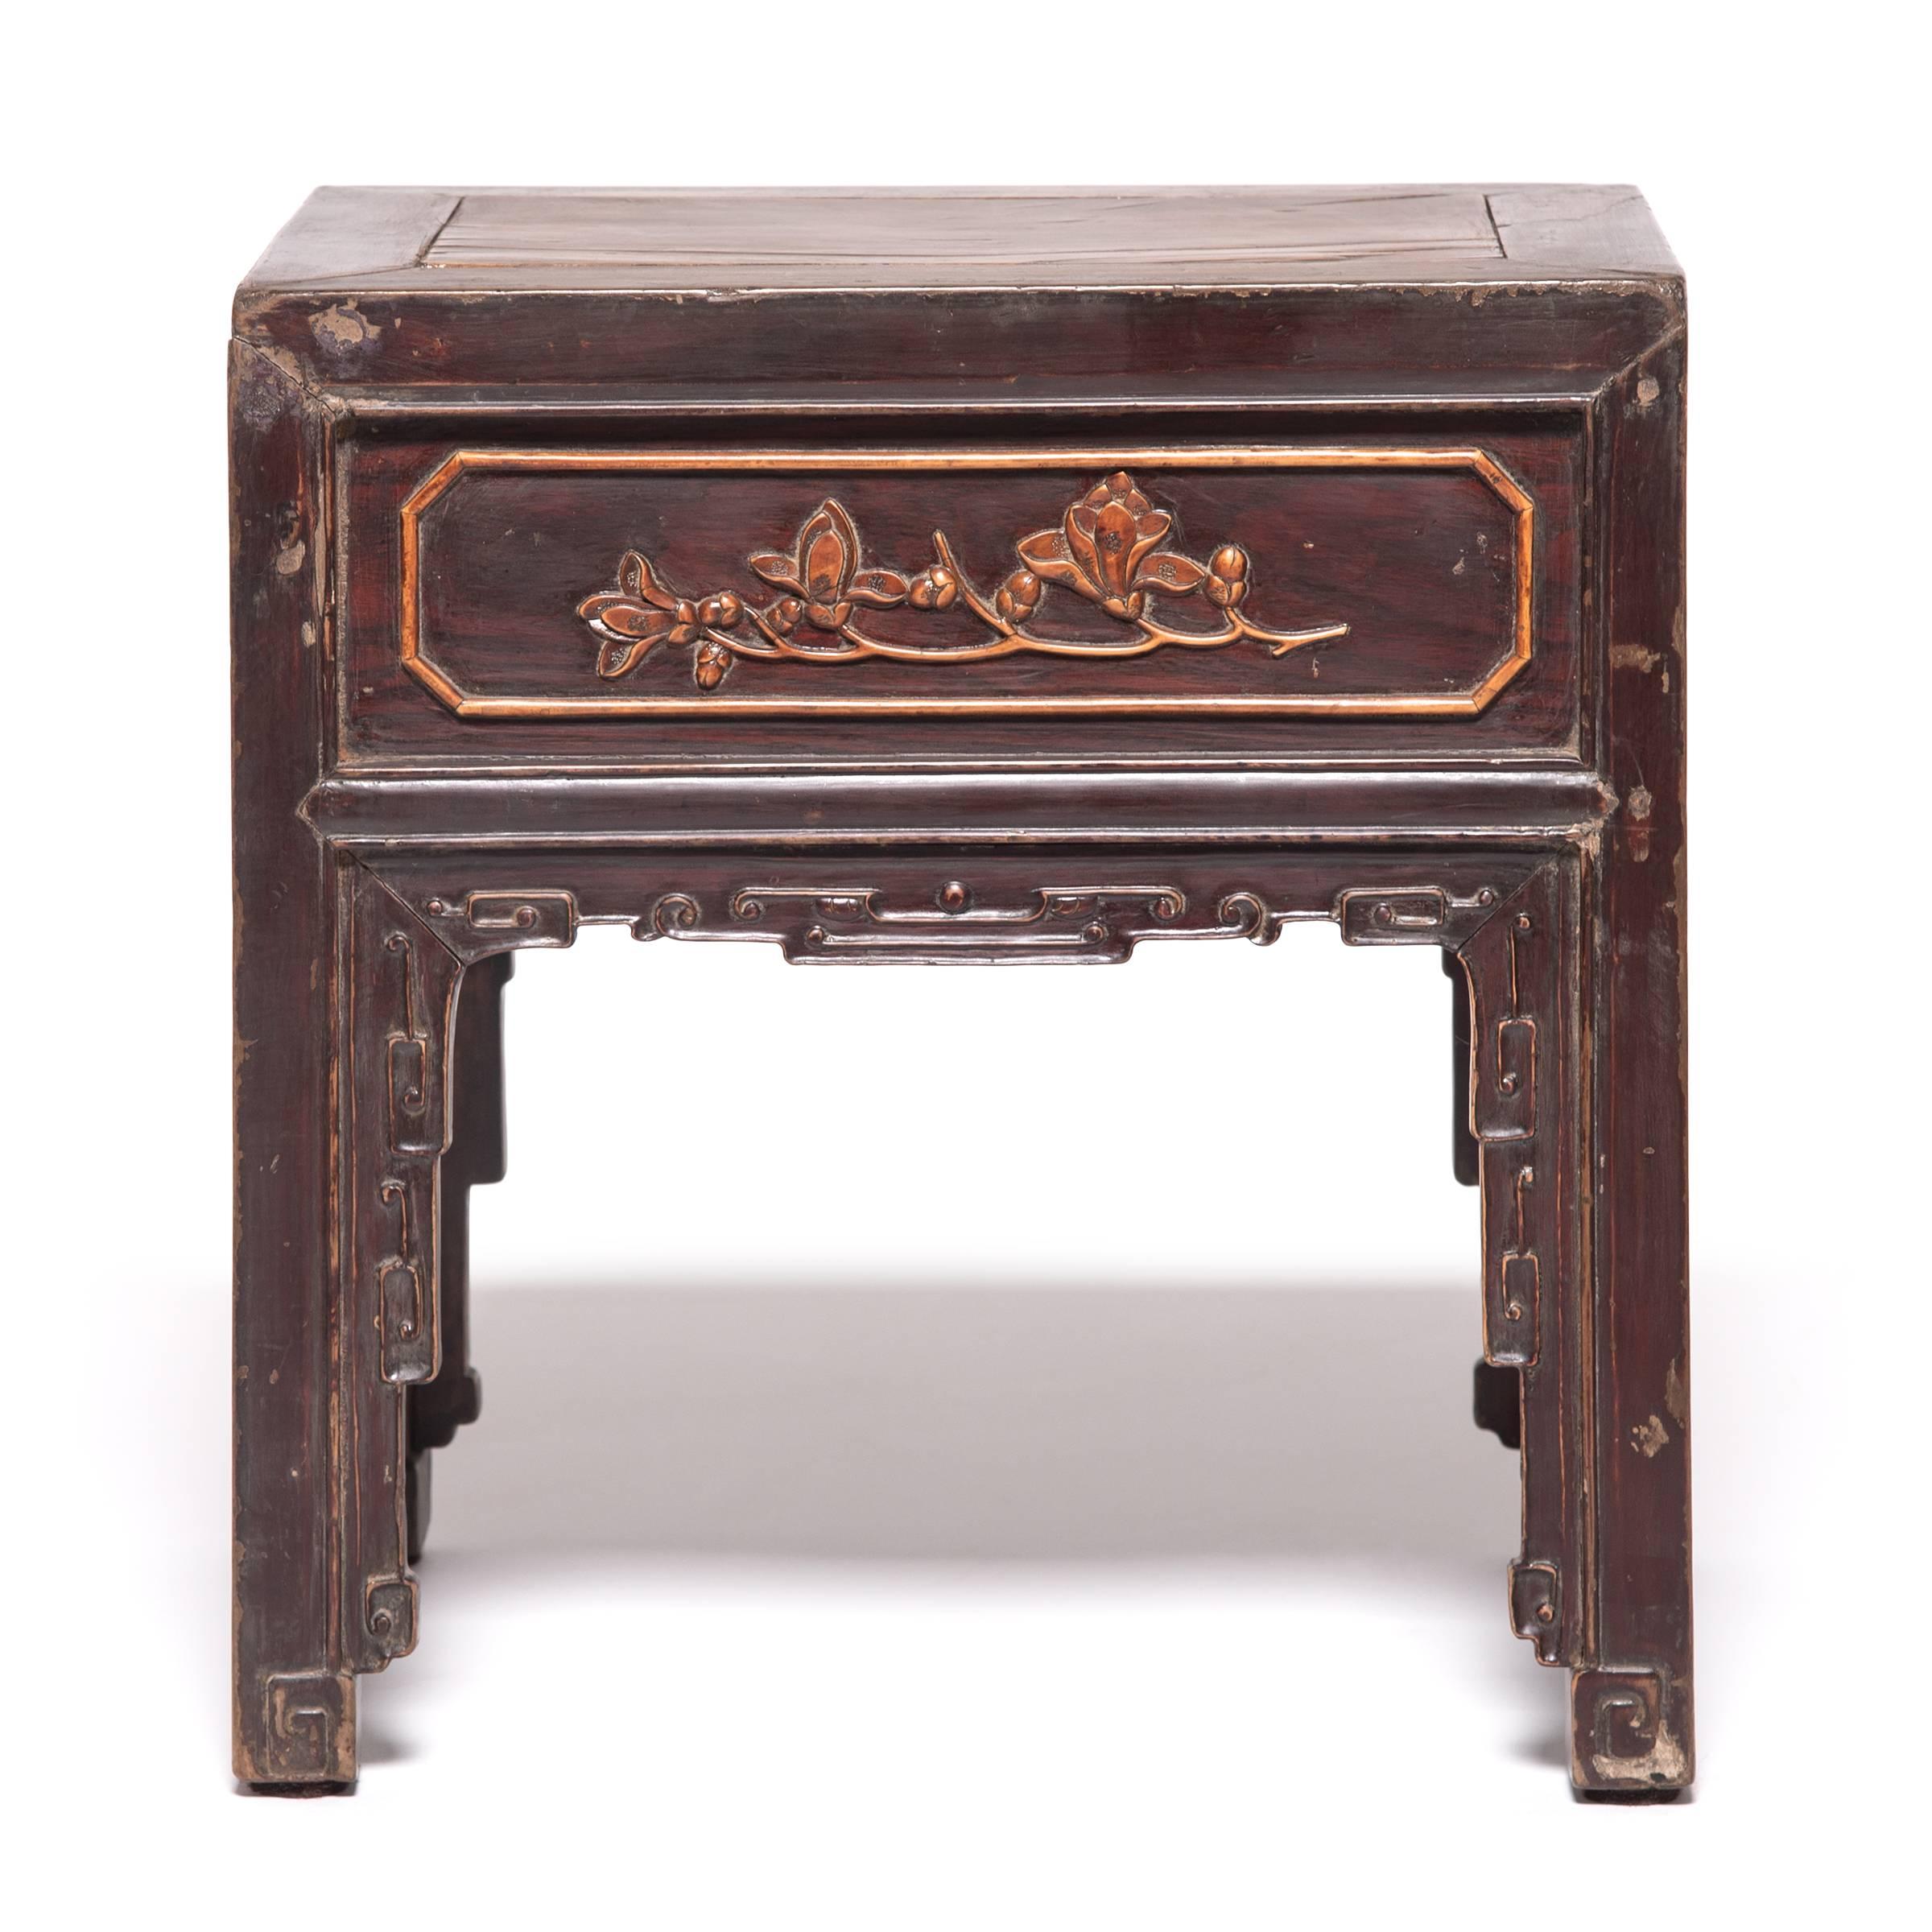 Qing Petite Chinese Display Table with Boxwood Inlay, c. 1850